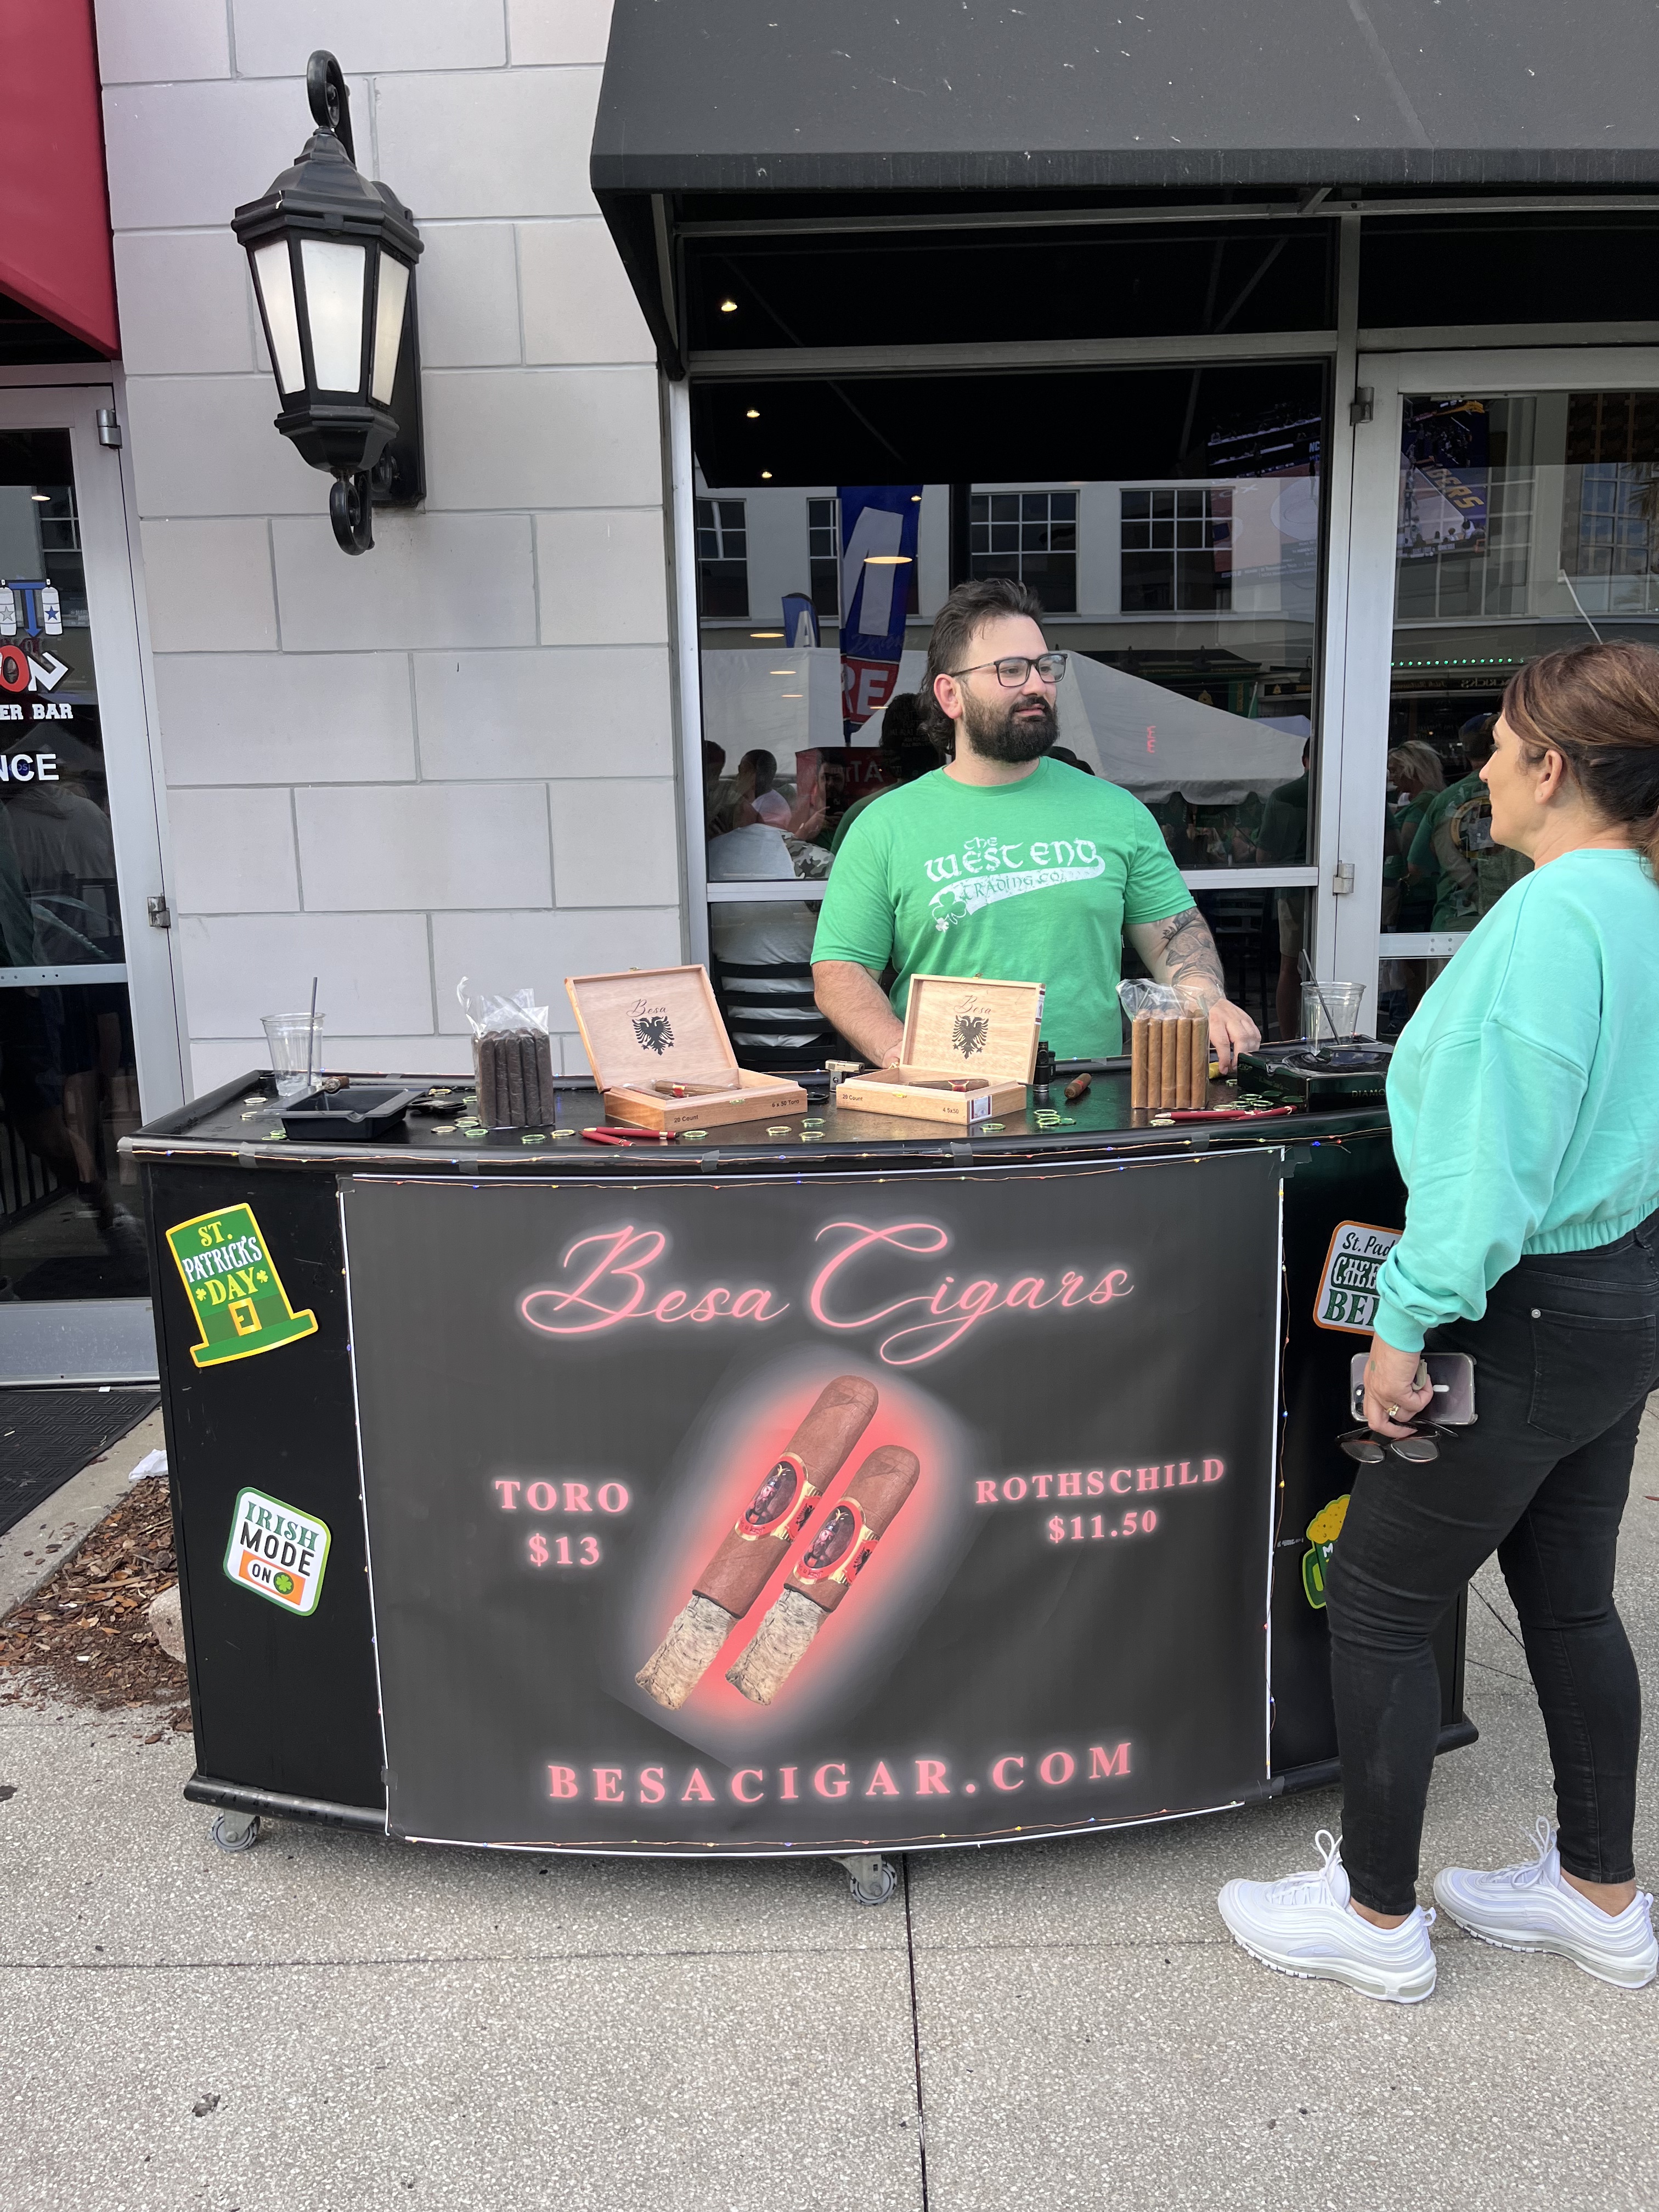 The Besa Cigar at St. Patrick's Day event